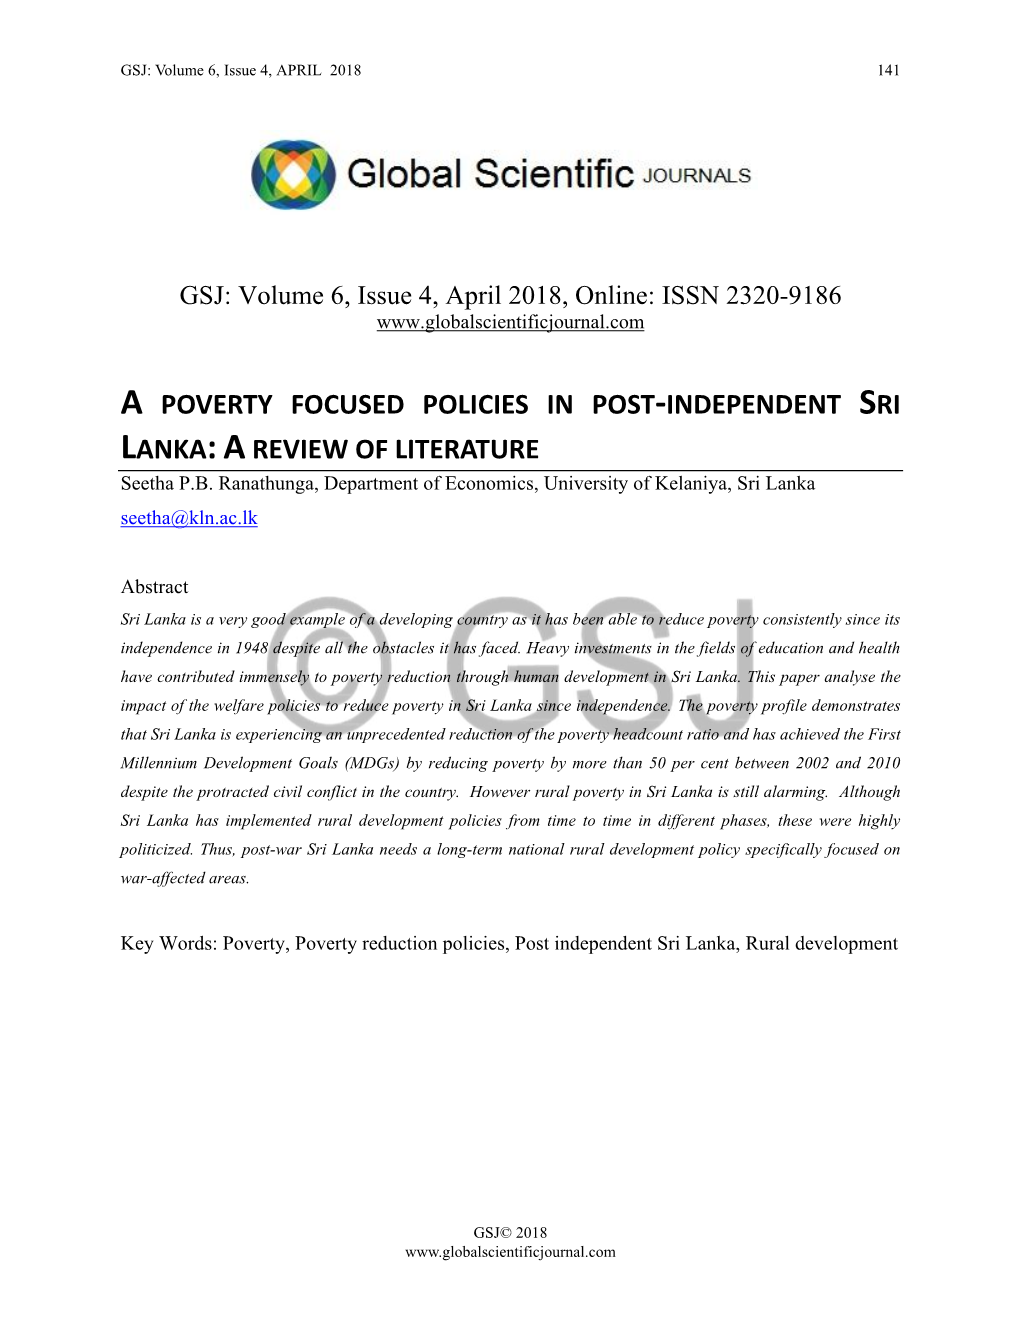 A Poverty Focused Policies in Post -Independent Sri Lanka